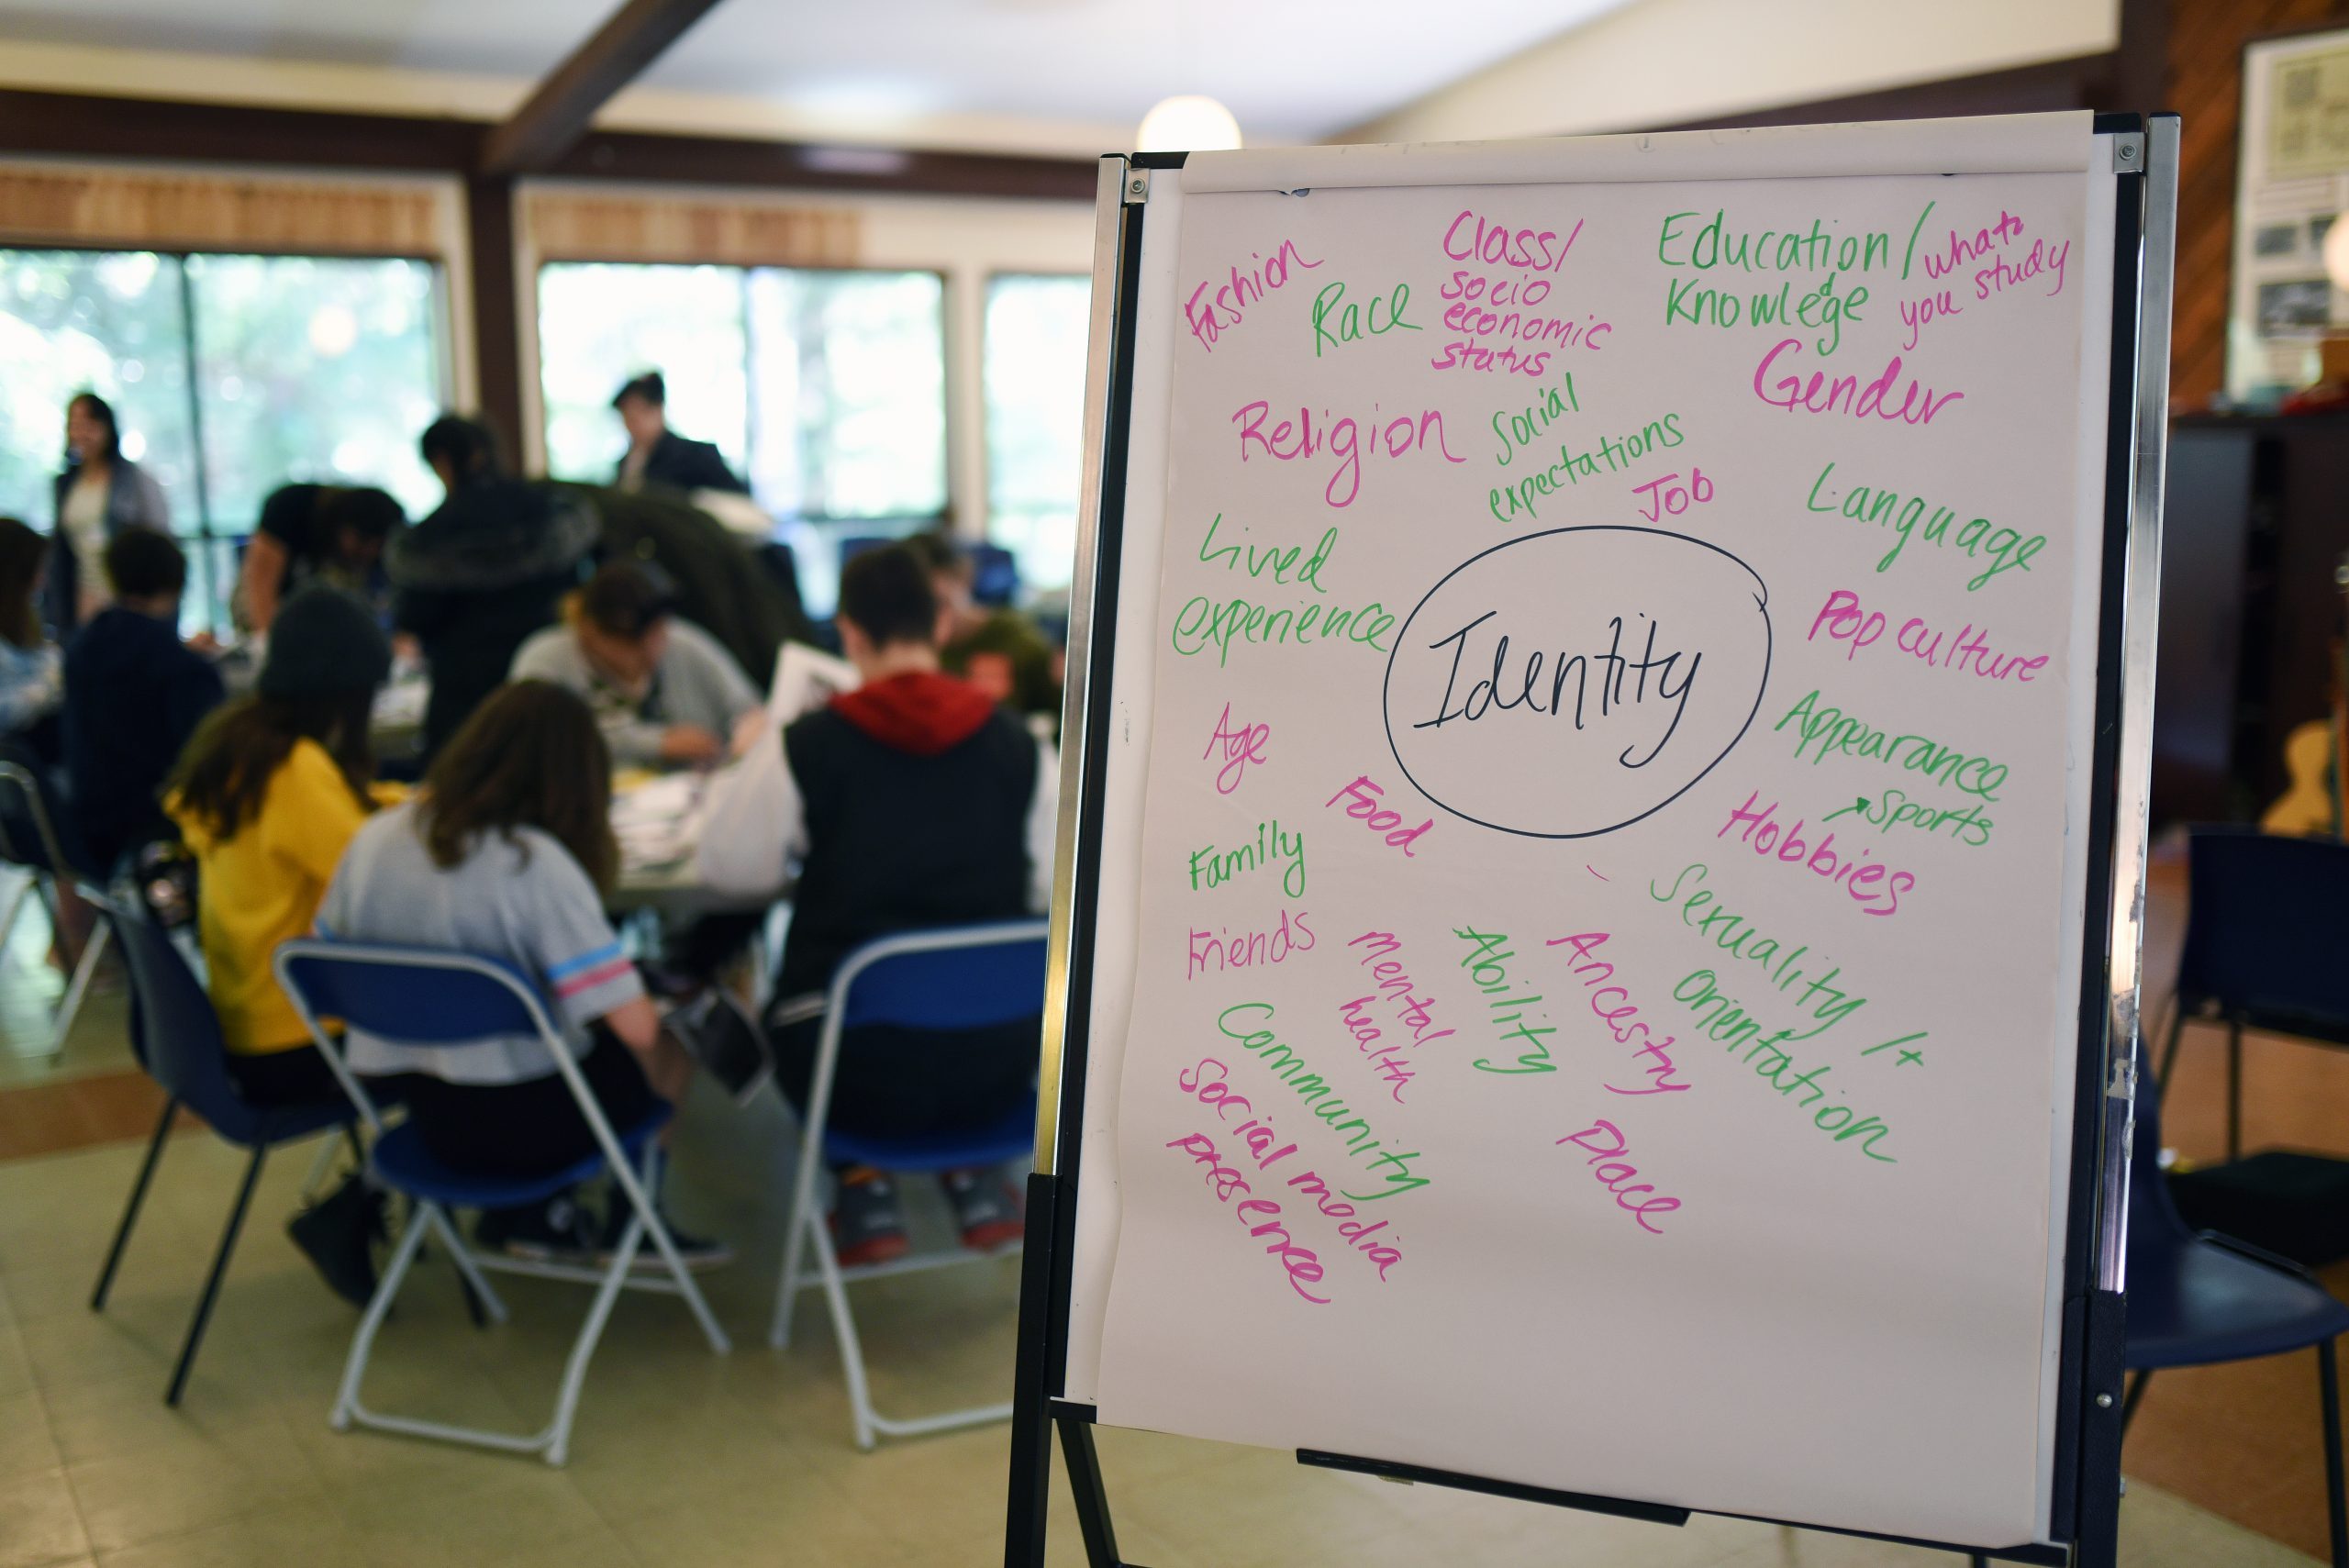 A flipchart paper with writing on it on the topic of identity is in the foreground of a group of youth sitting in chairs around tables.